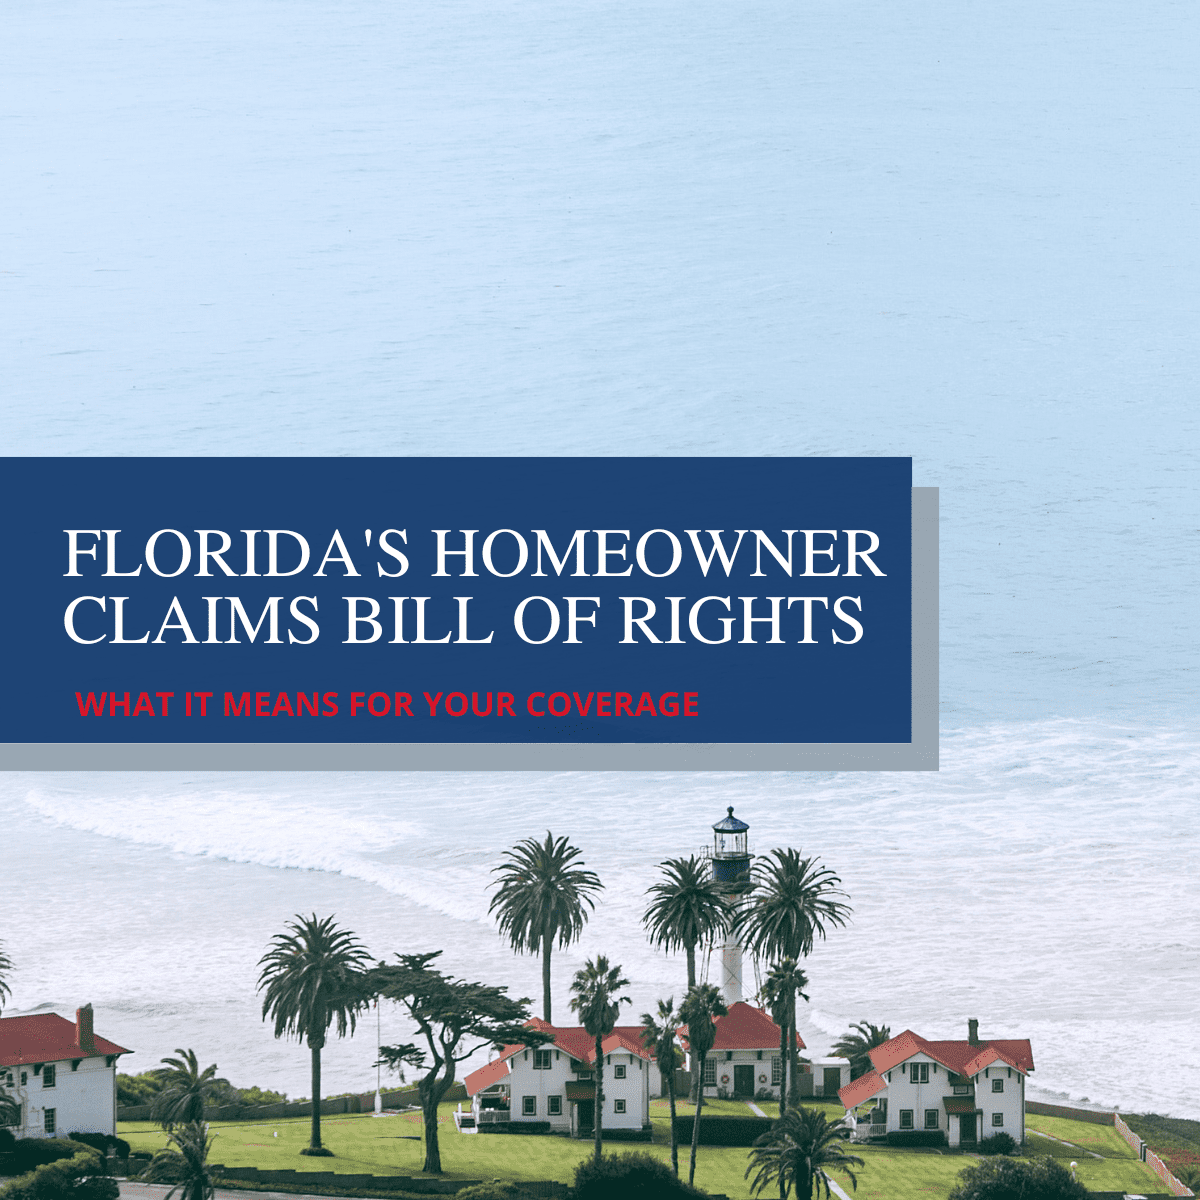 What You Need to Know About Florida's Homeowner Claims Bill of Rights